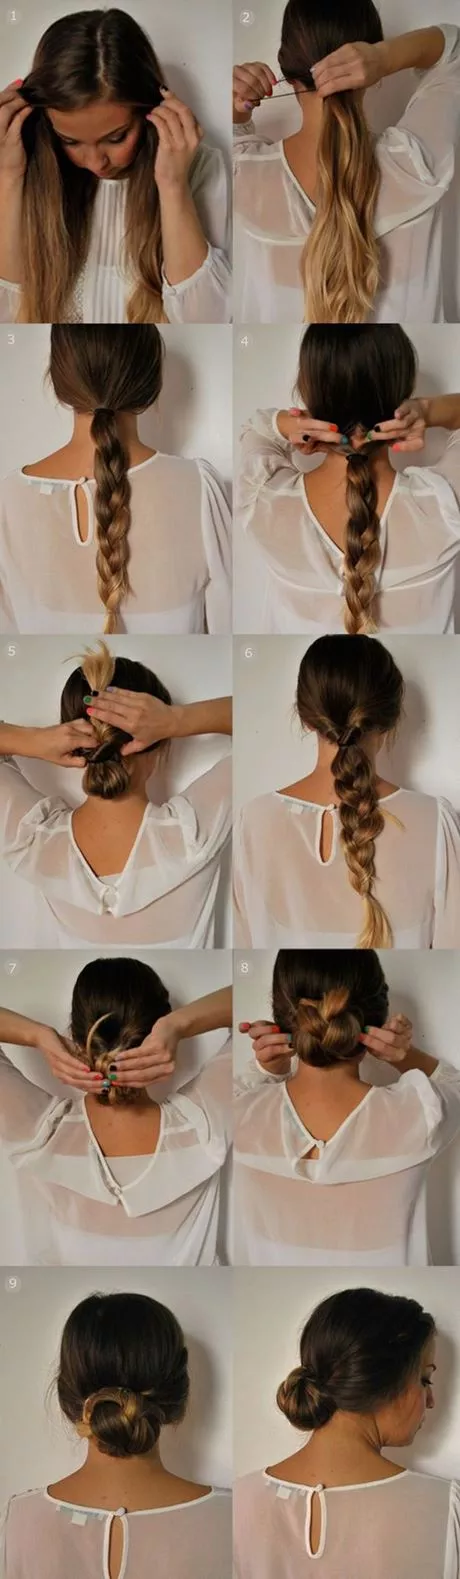 Simple hairstyle for girl at home simple-hairstyle-for-girl-at-home-05_11-3-3